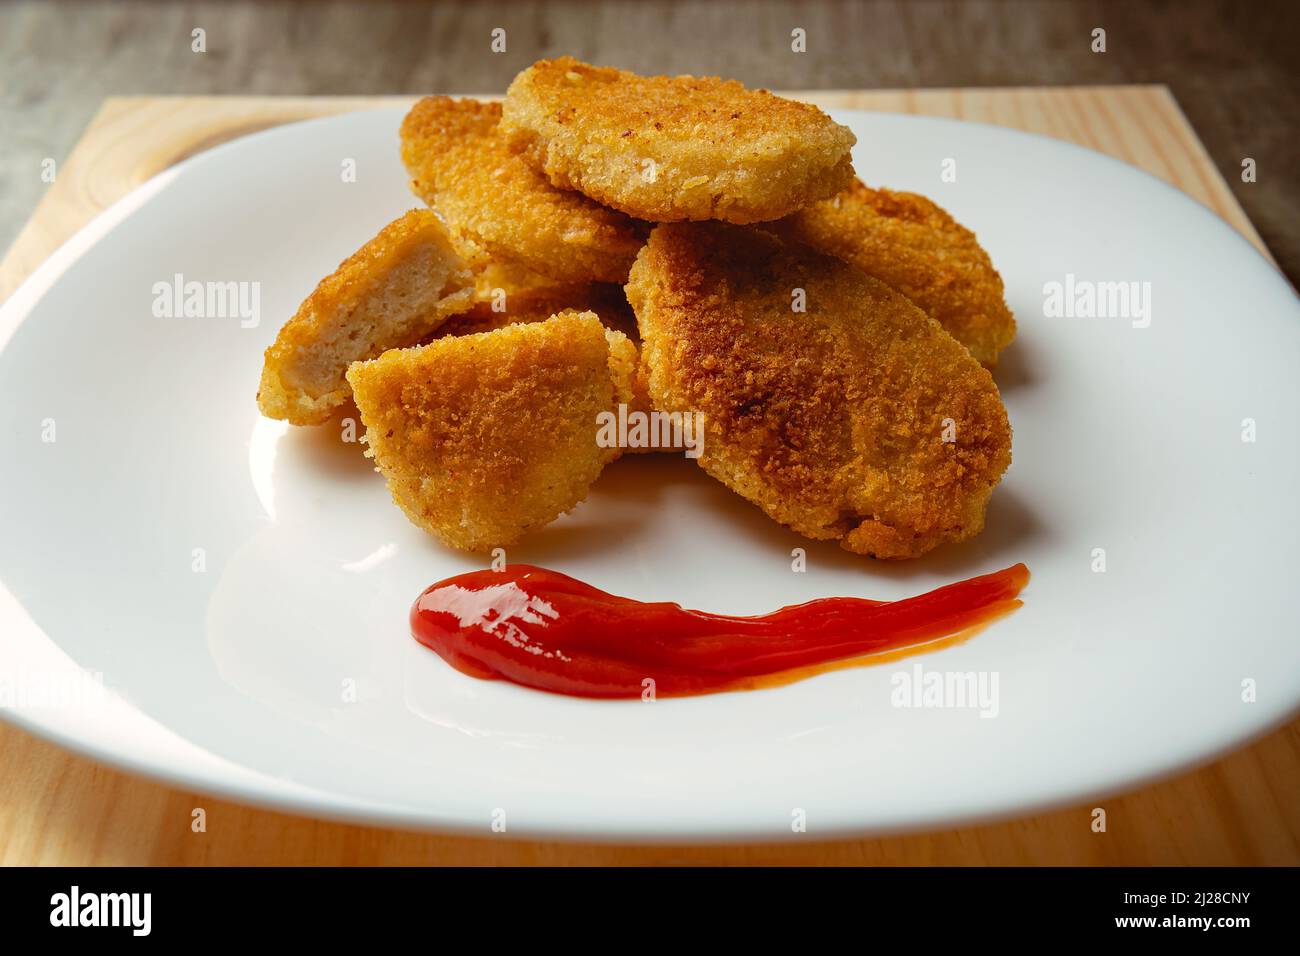 Chicken nuggets with crispy fried bread, wooden bottom. Tasty chicken nuggets. with some tomato sauce ready to eat. Stock Photo